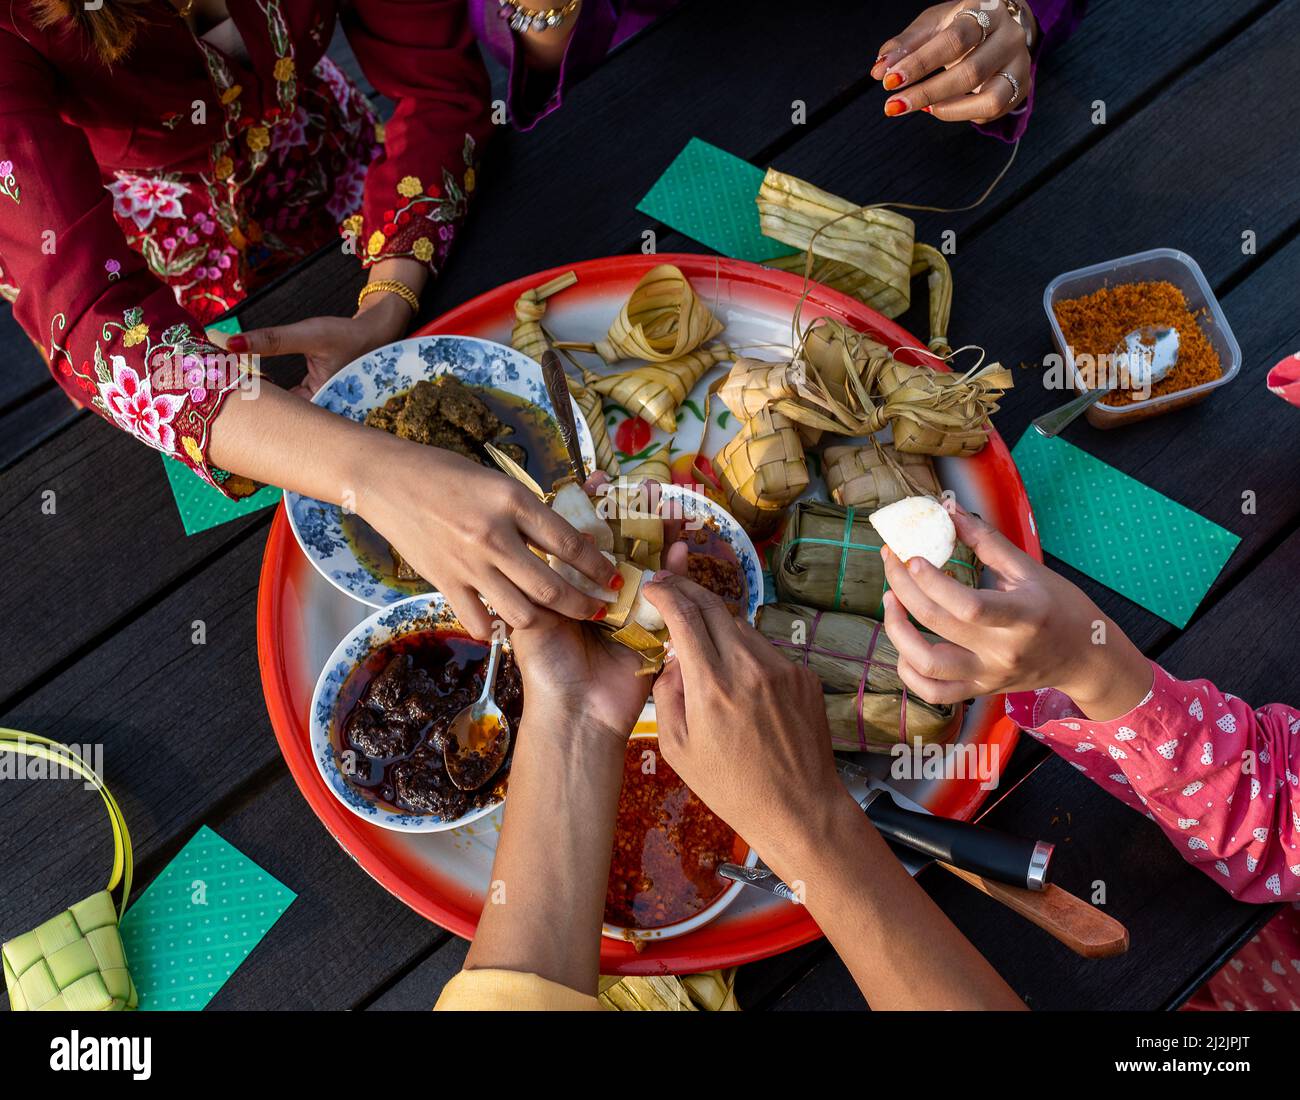 Top view of hands of Muslim family enjoying a variety of traditional Malay cuisines on a circular tray on a black table, at end of Ramadan Mubarak Stock Photo